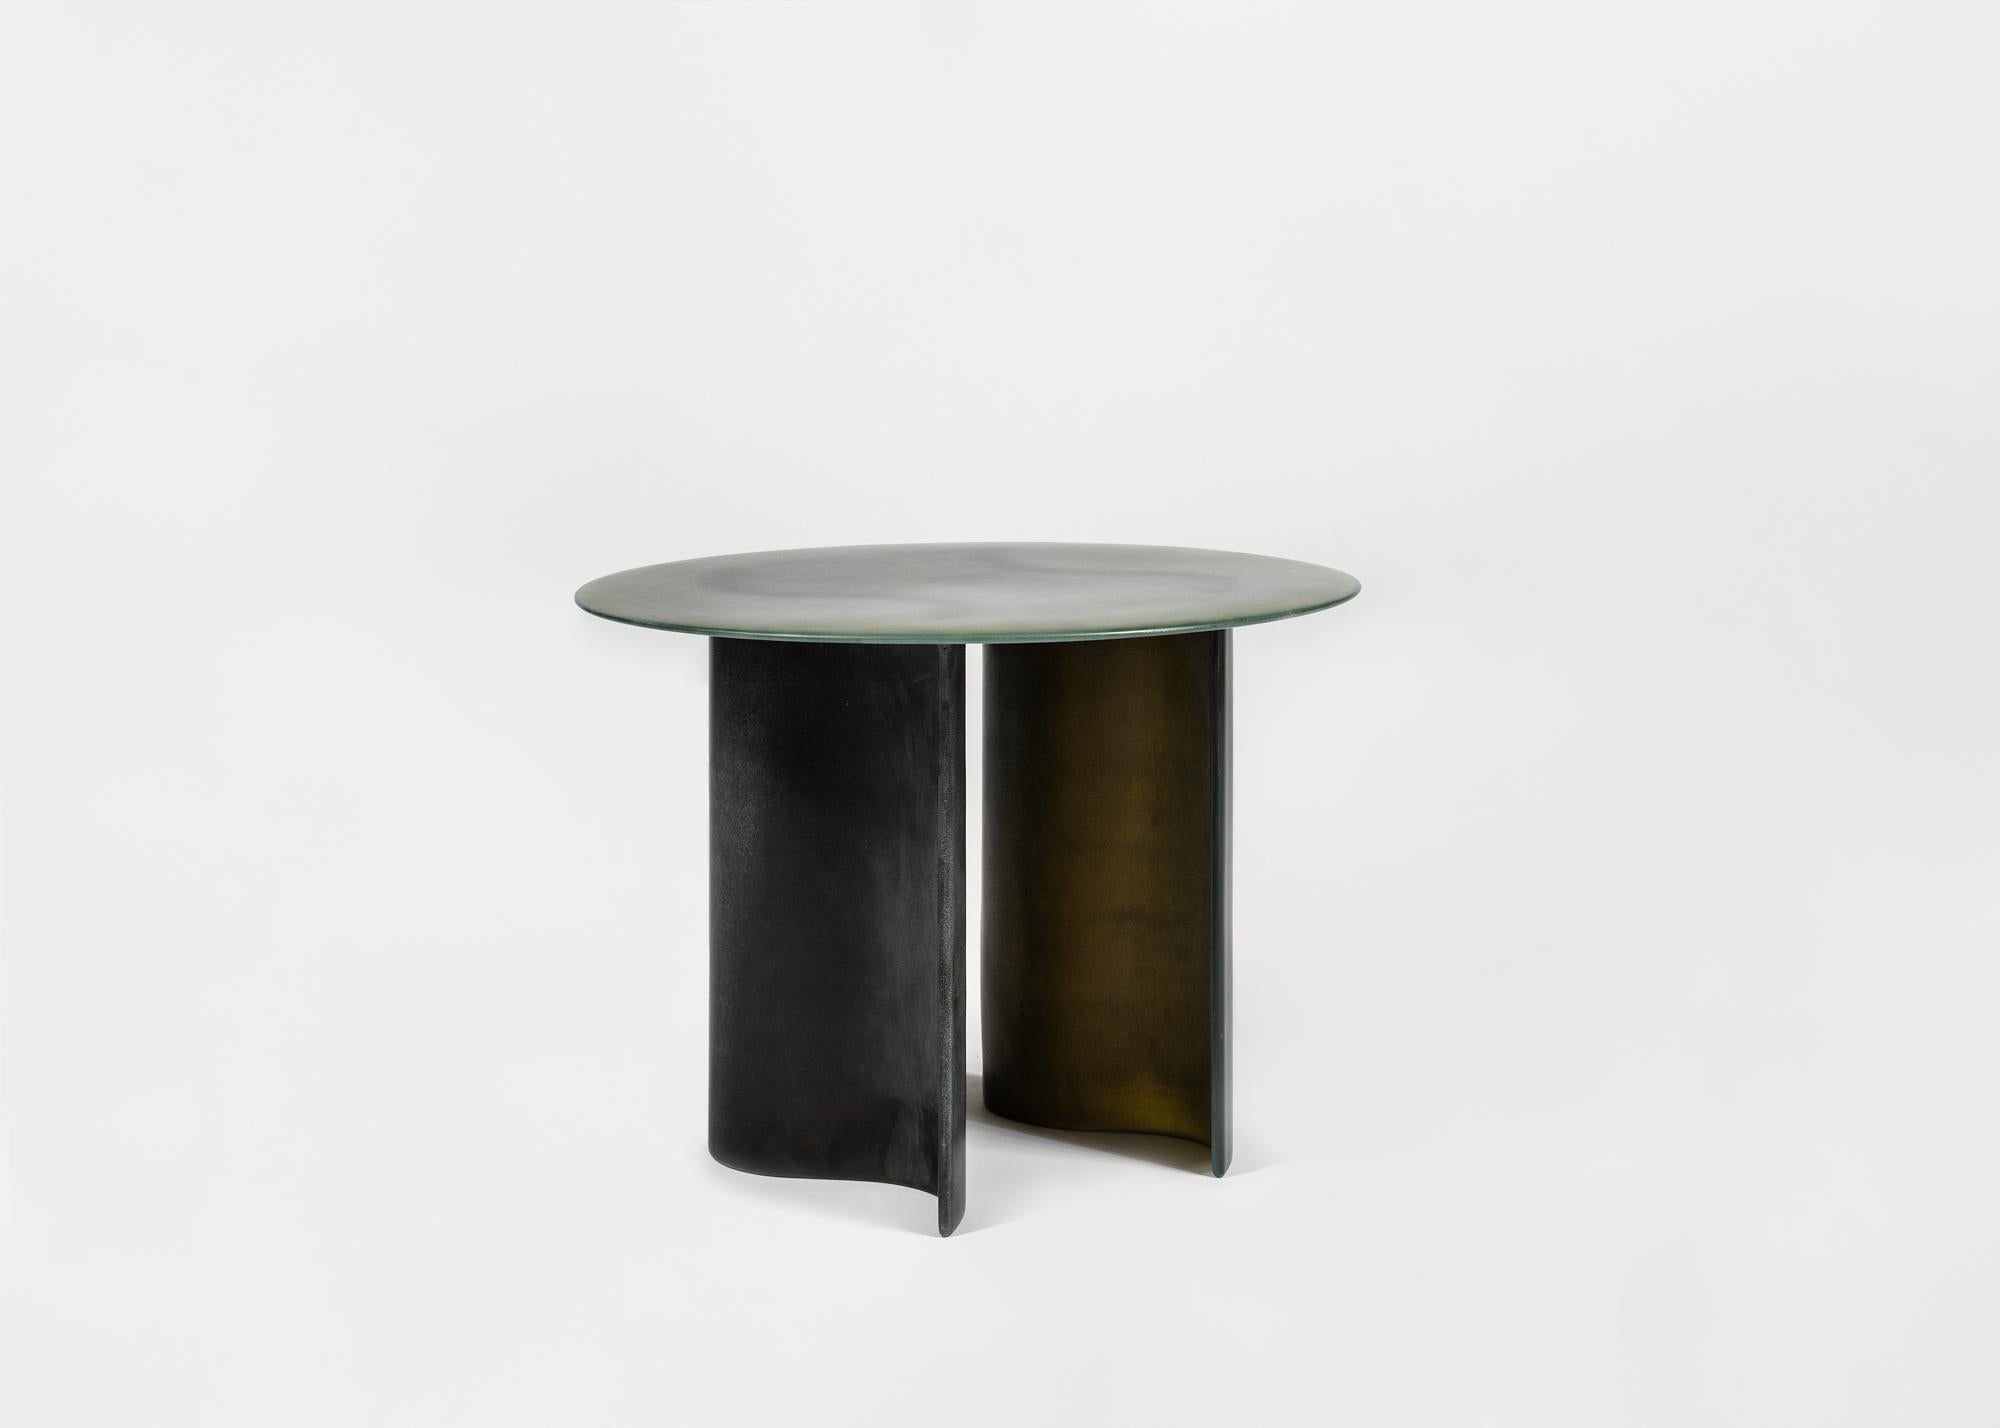 The New Wave Side Table by STUDIO LUKAS COBER. The New Wave collection illustrates his fascination for oceans force. They are built by hand-layering numerous layers of fiberglass cloth with resin into desired shapes. After combining the shapes and